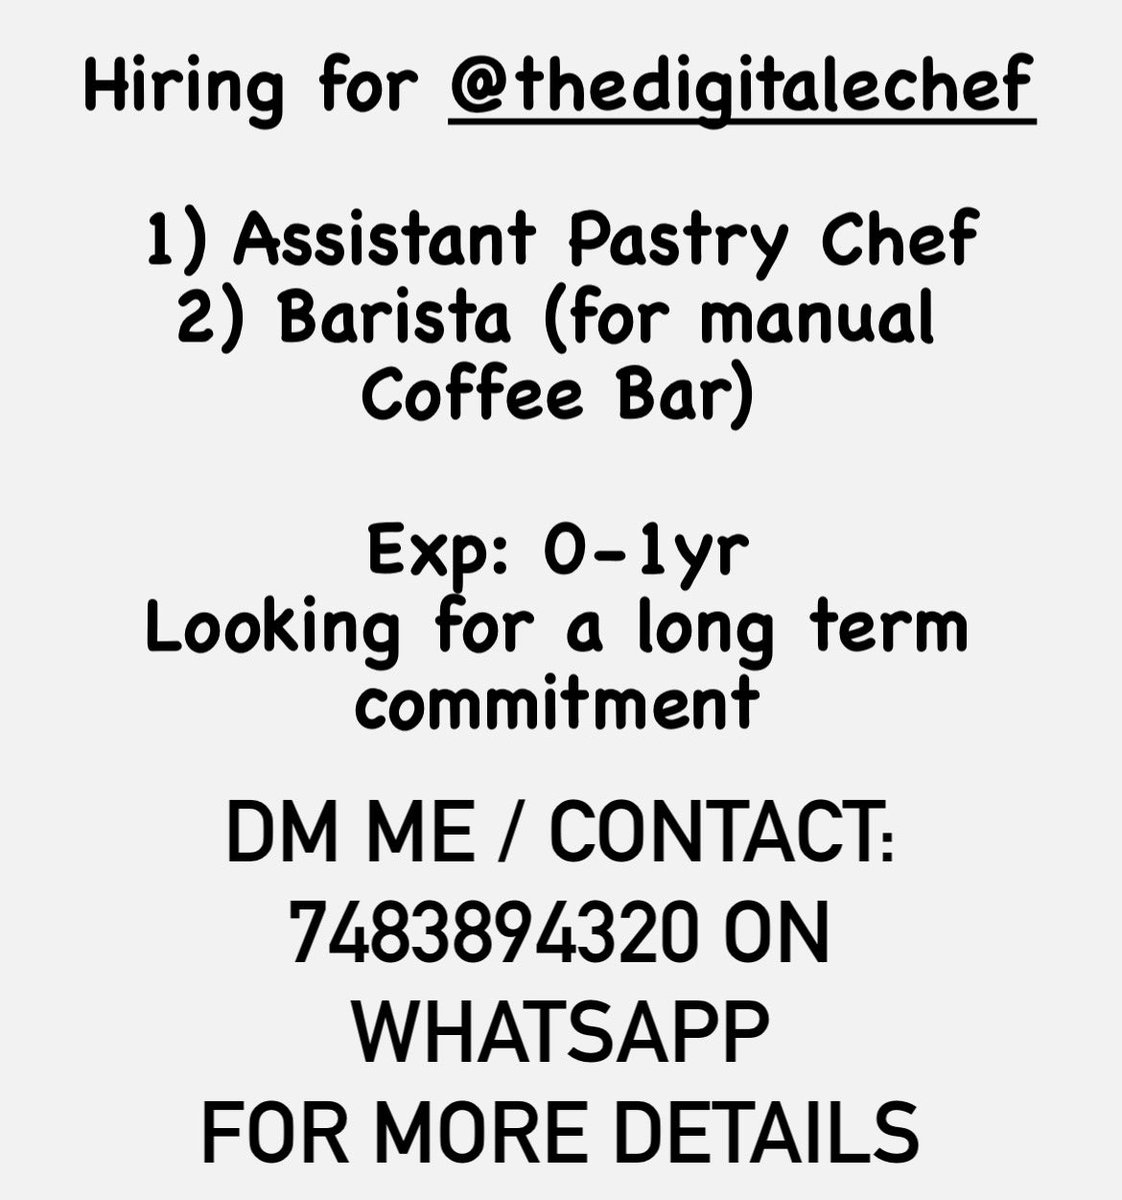 Hiring for @TheDigitaleChef
 A Pastry Chef and A Barista

#vegancafe #hsrlayout #TheDigitaleChef